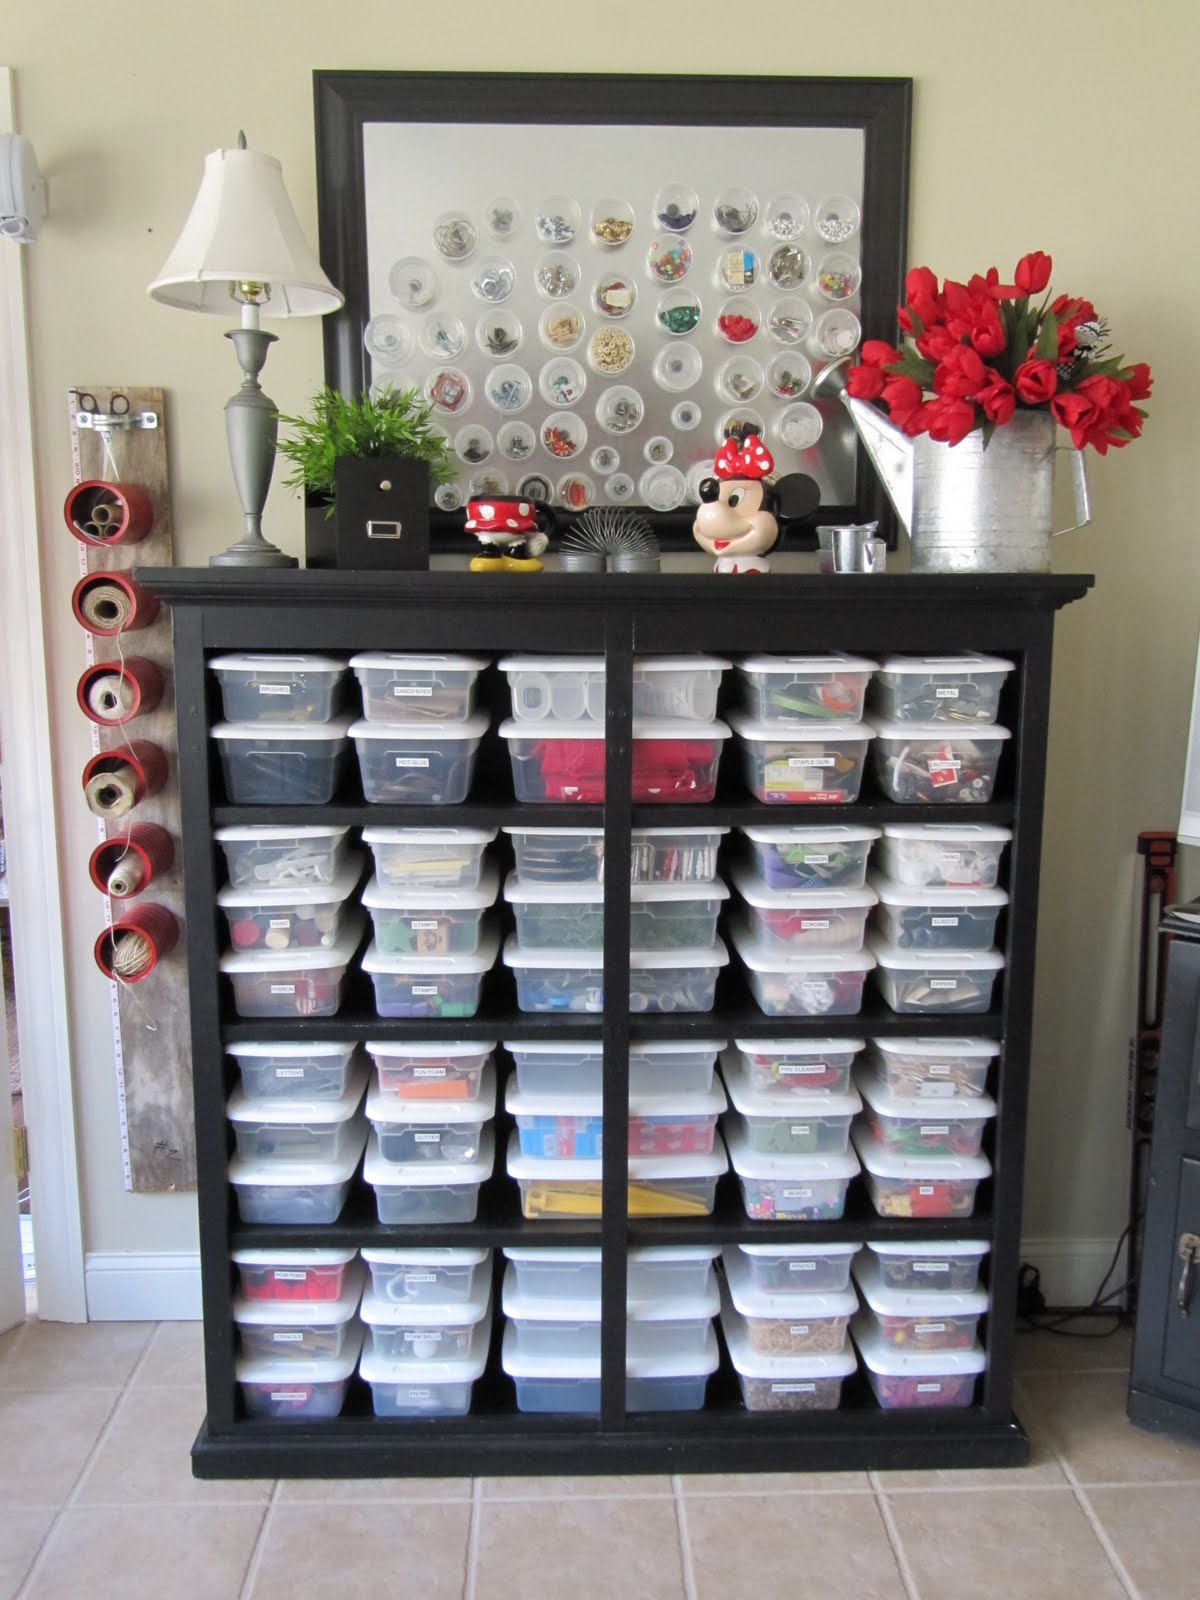 Lovely Green Lifestyle: DIY Home Ideas Part II: Let's Get Organized!